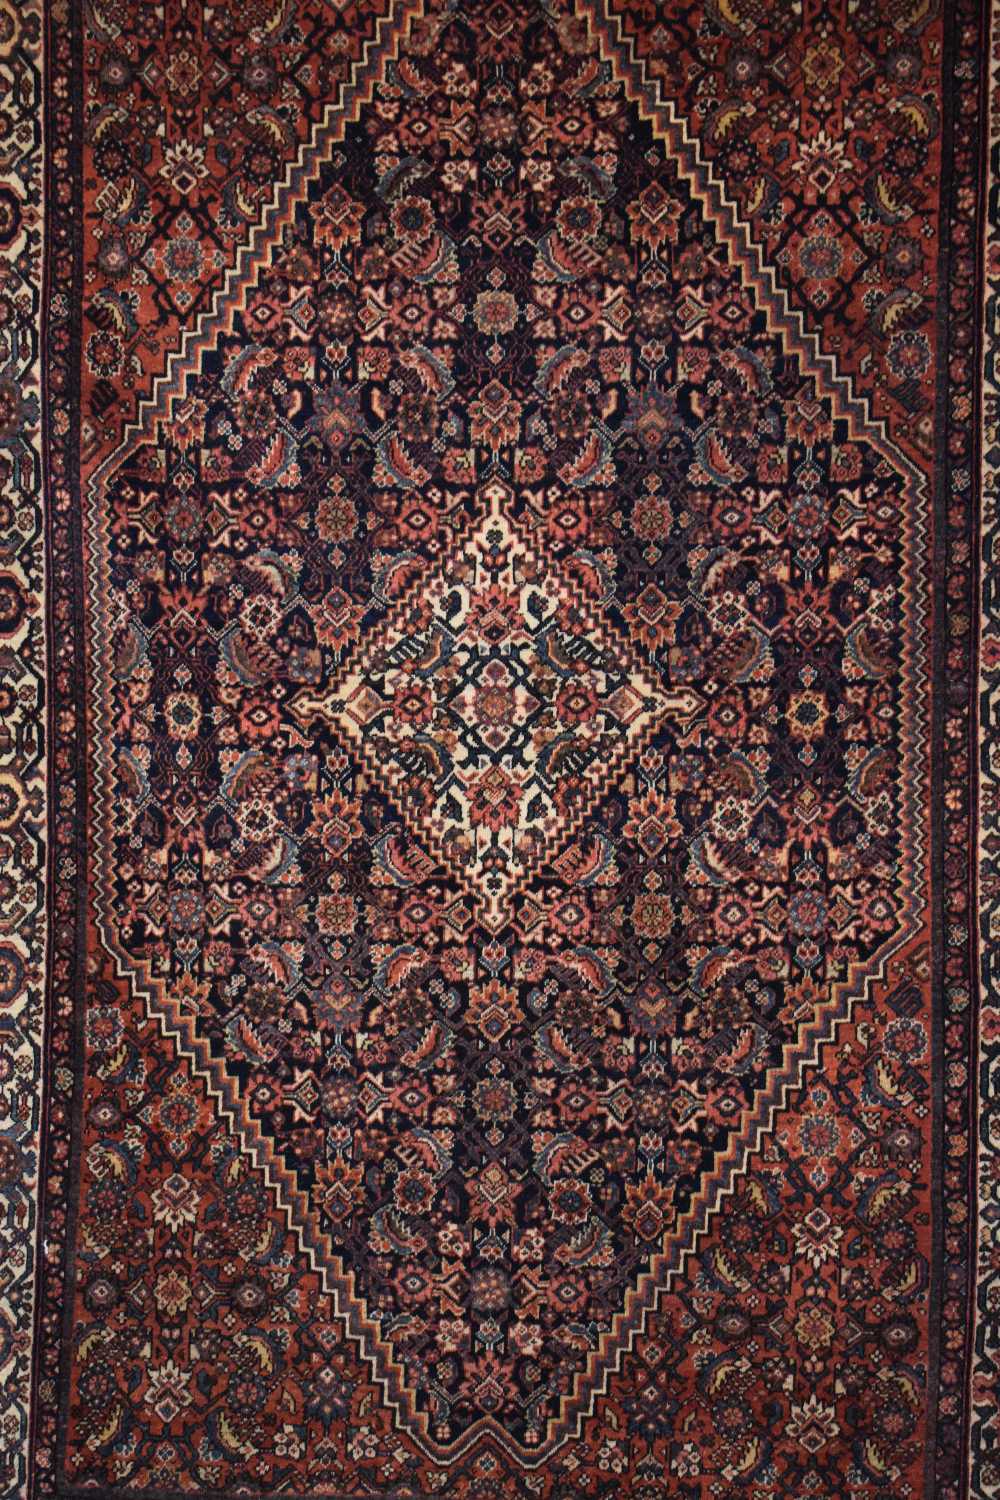 Feraghan rug, north west Persia, circa 1920s-30s, 6ft. 7in. X 4ft. 2in. 2.01m. x 1.27m. Dark blue - Image 9 of 10